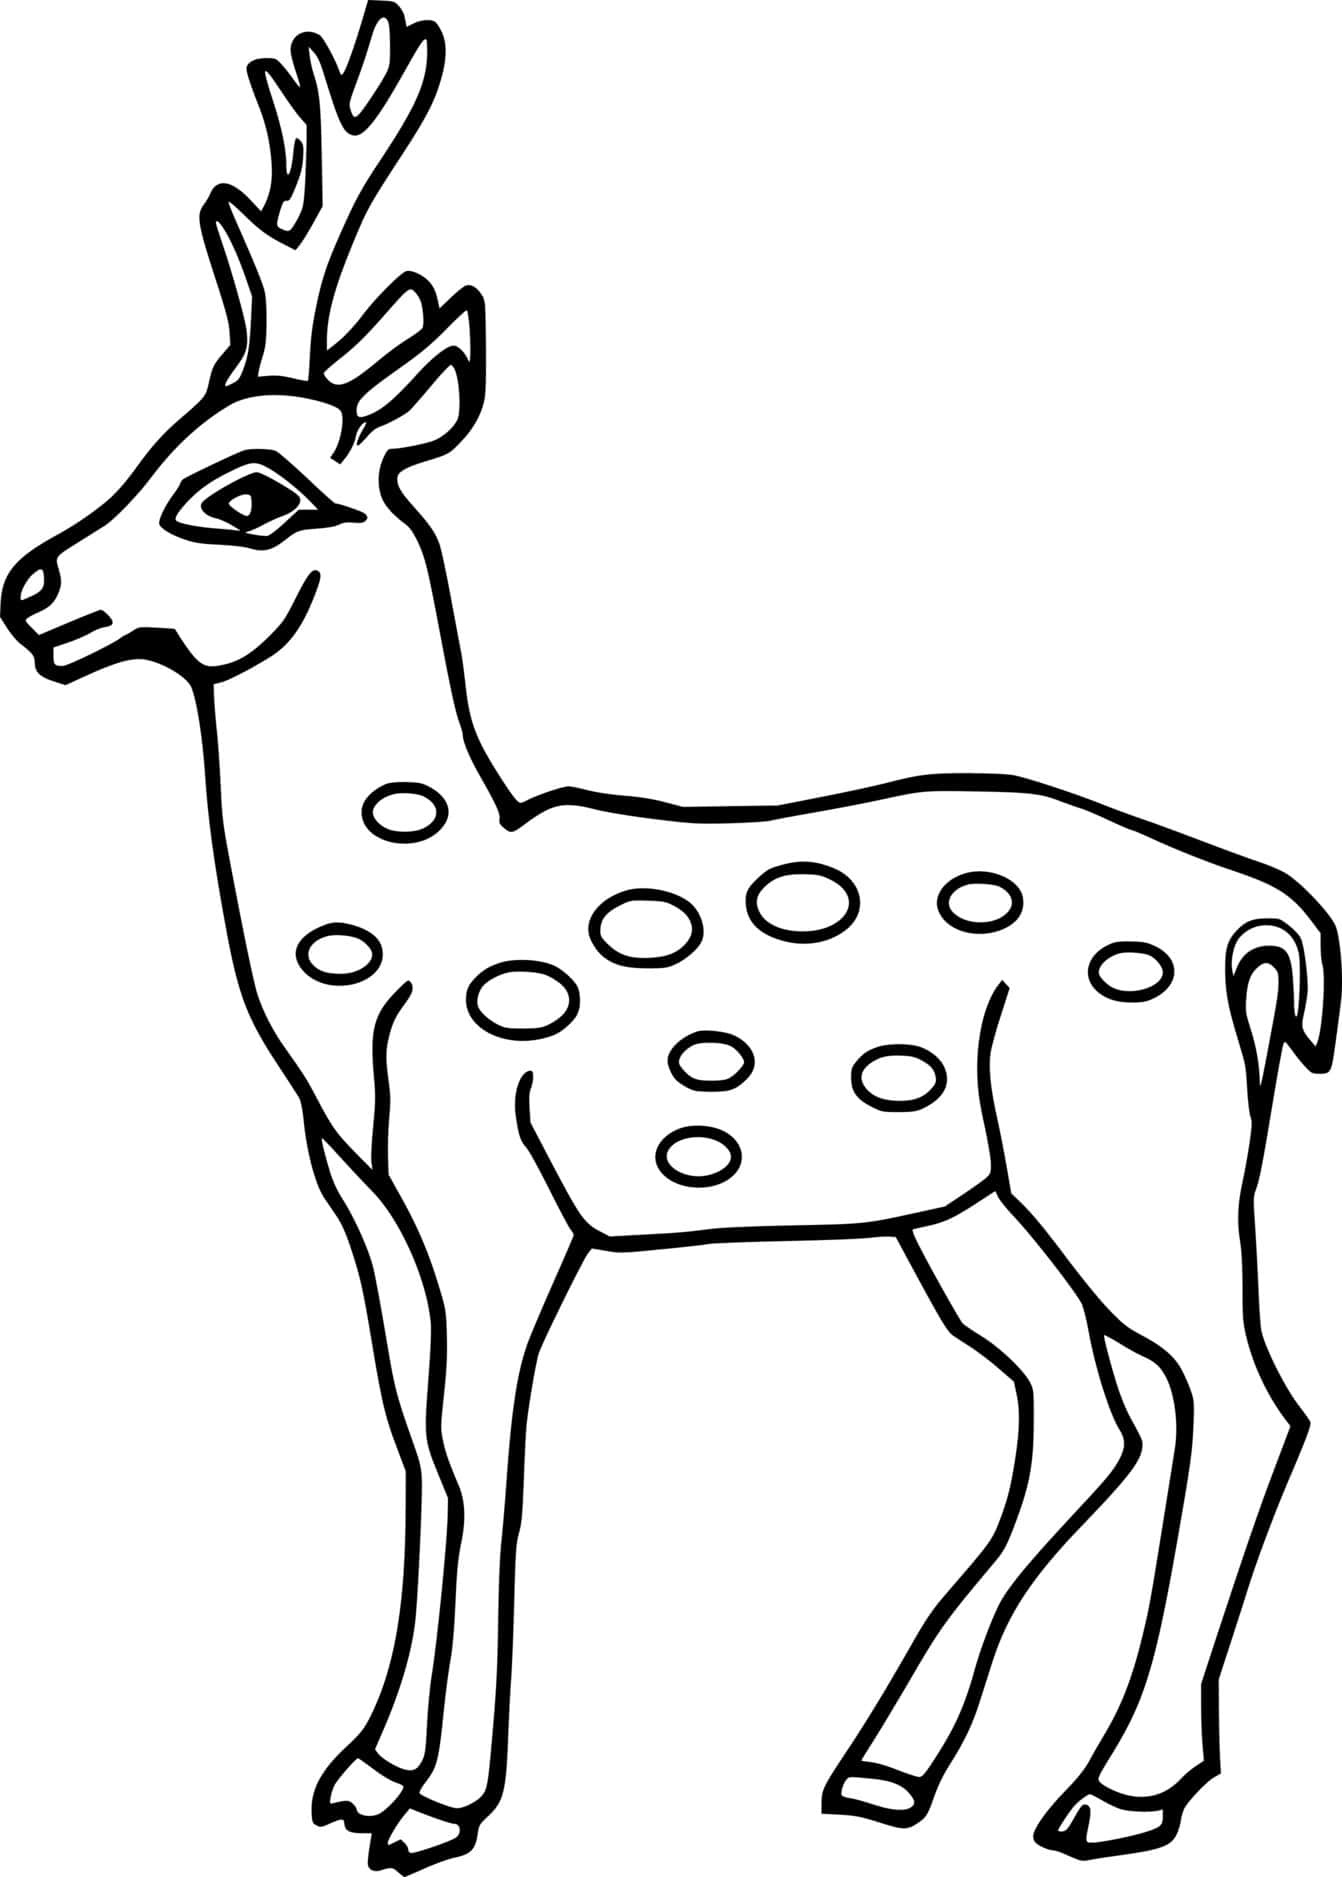 Simple Spotted Deer Coloring Page